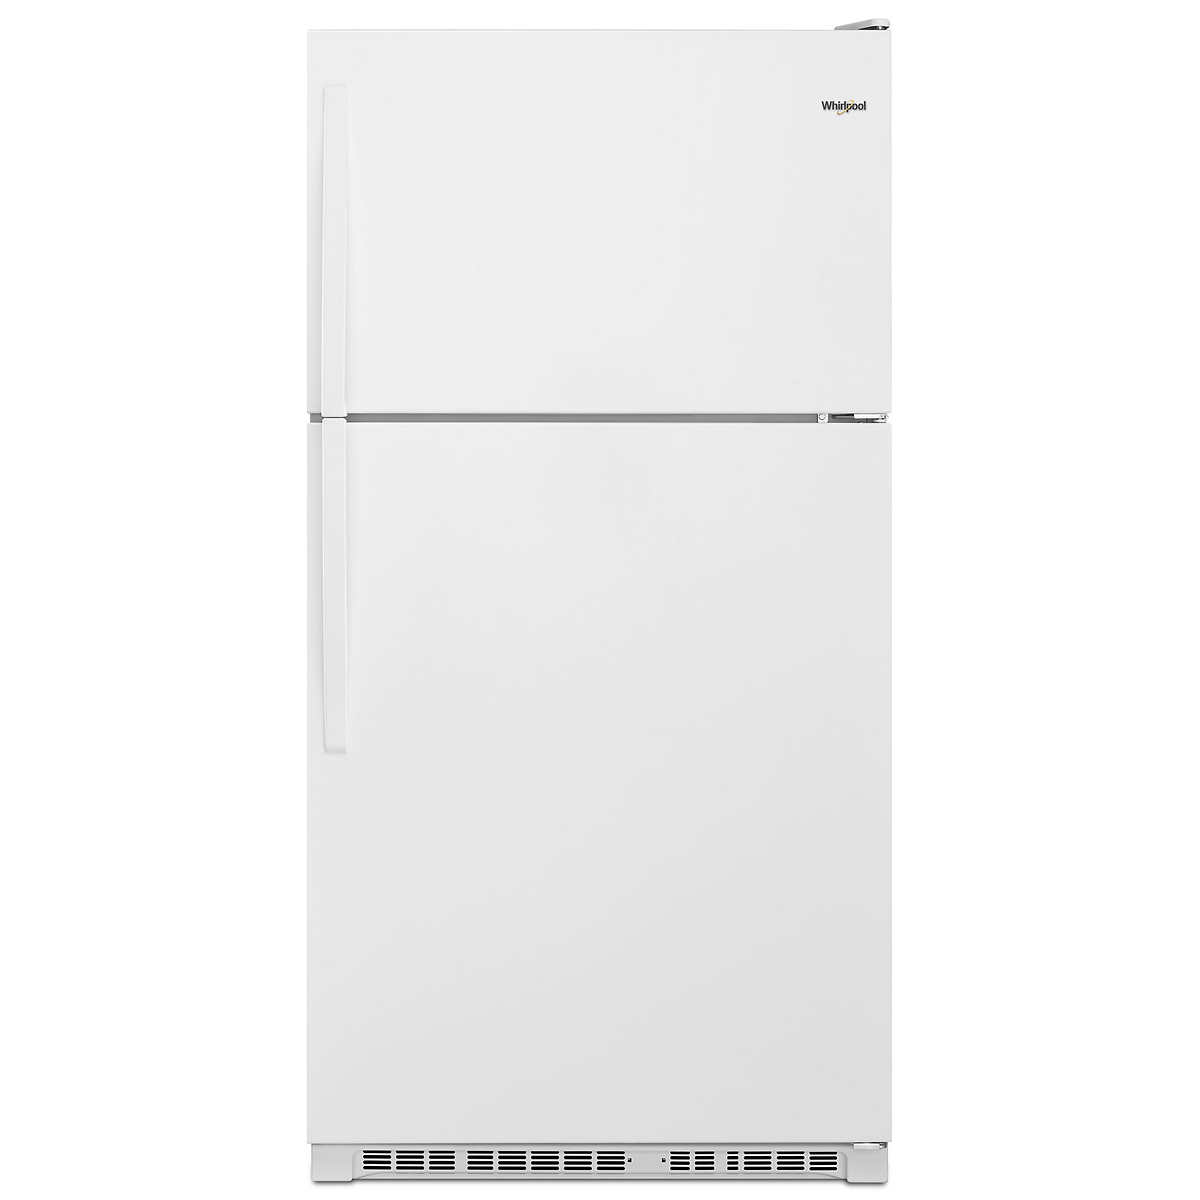 Whirlpool 20 cu. ft. Top Freezer Refrigerator with Frameless Glass Shelves - $599 at Costco